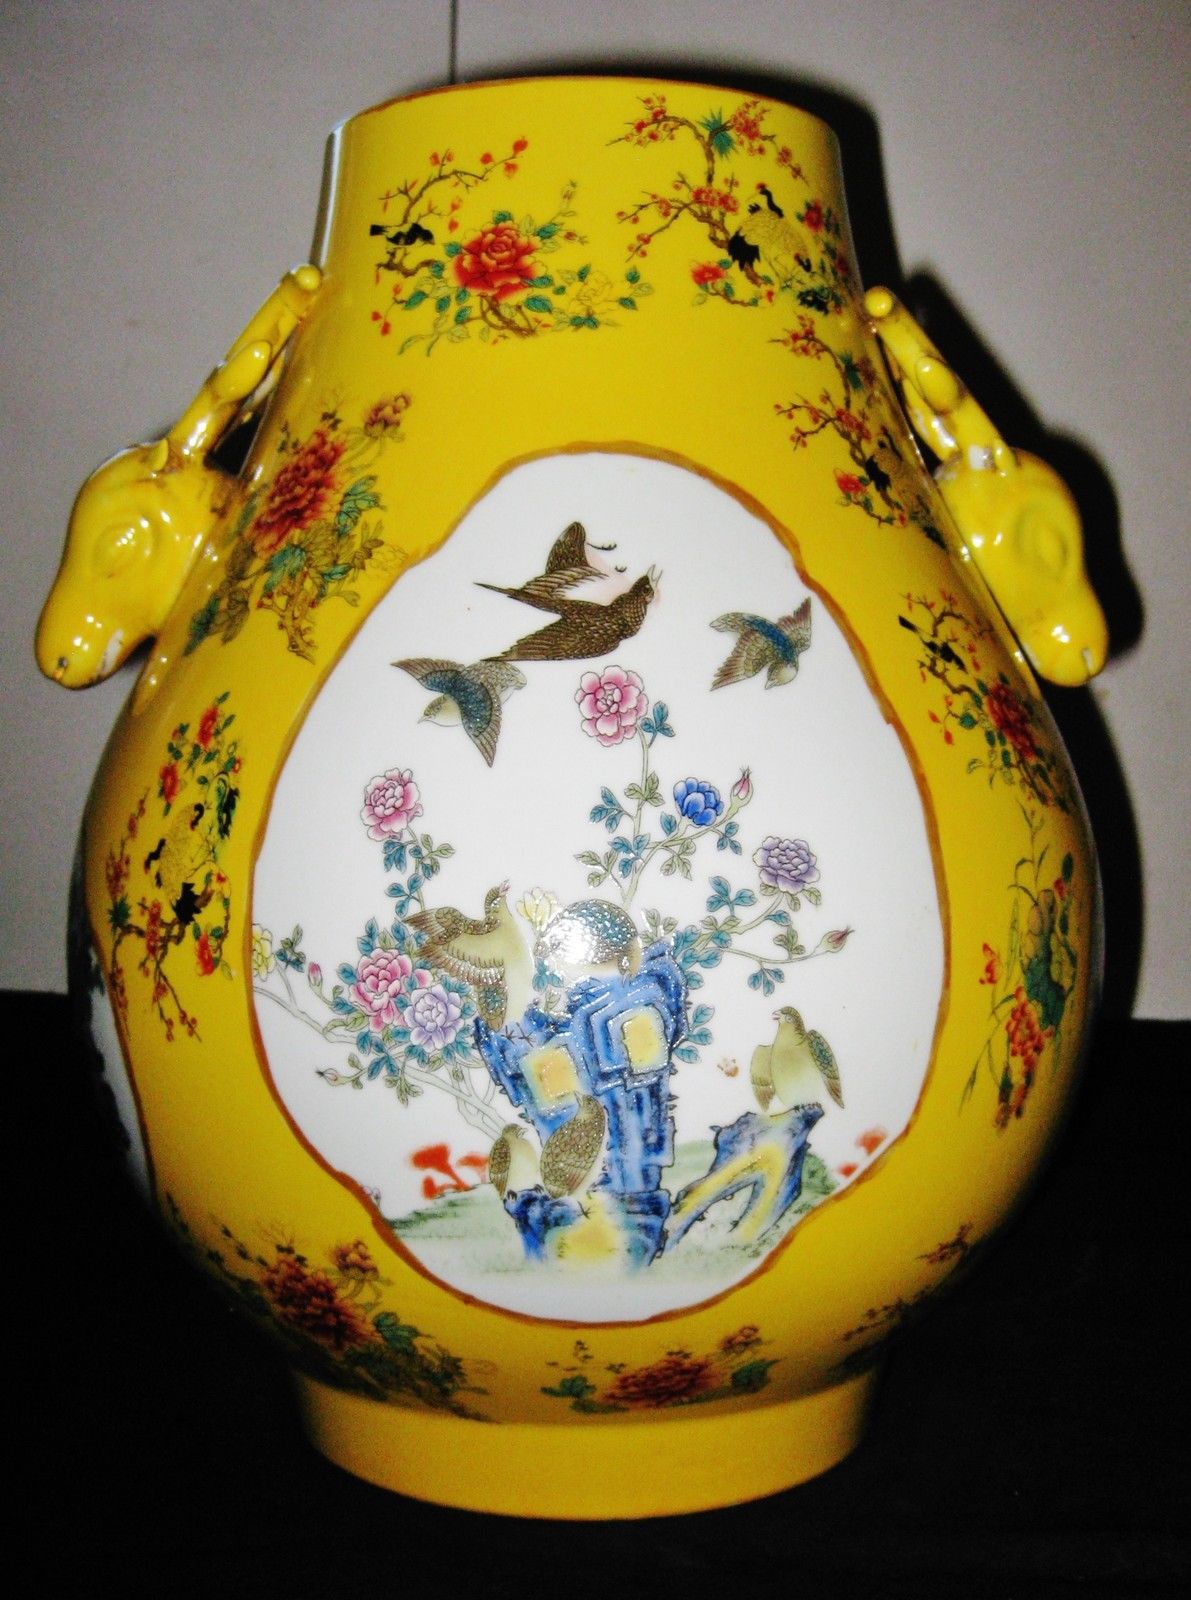 ANTIQUE CHINESE PORCELAIN FLOWER BIRD VASE WITH TWO DEAR HEADS,19TH CENTURY.